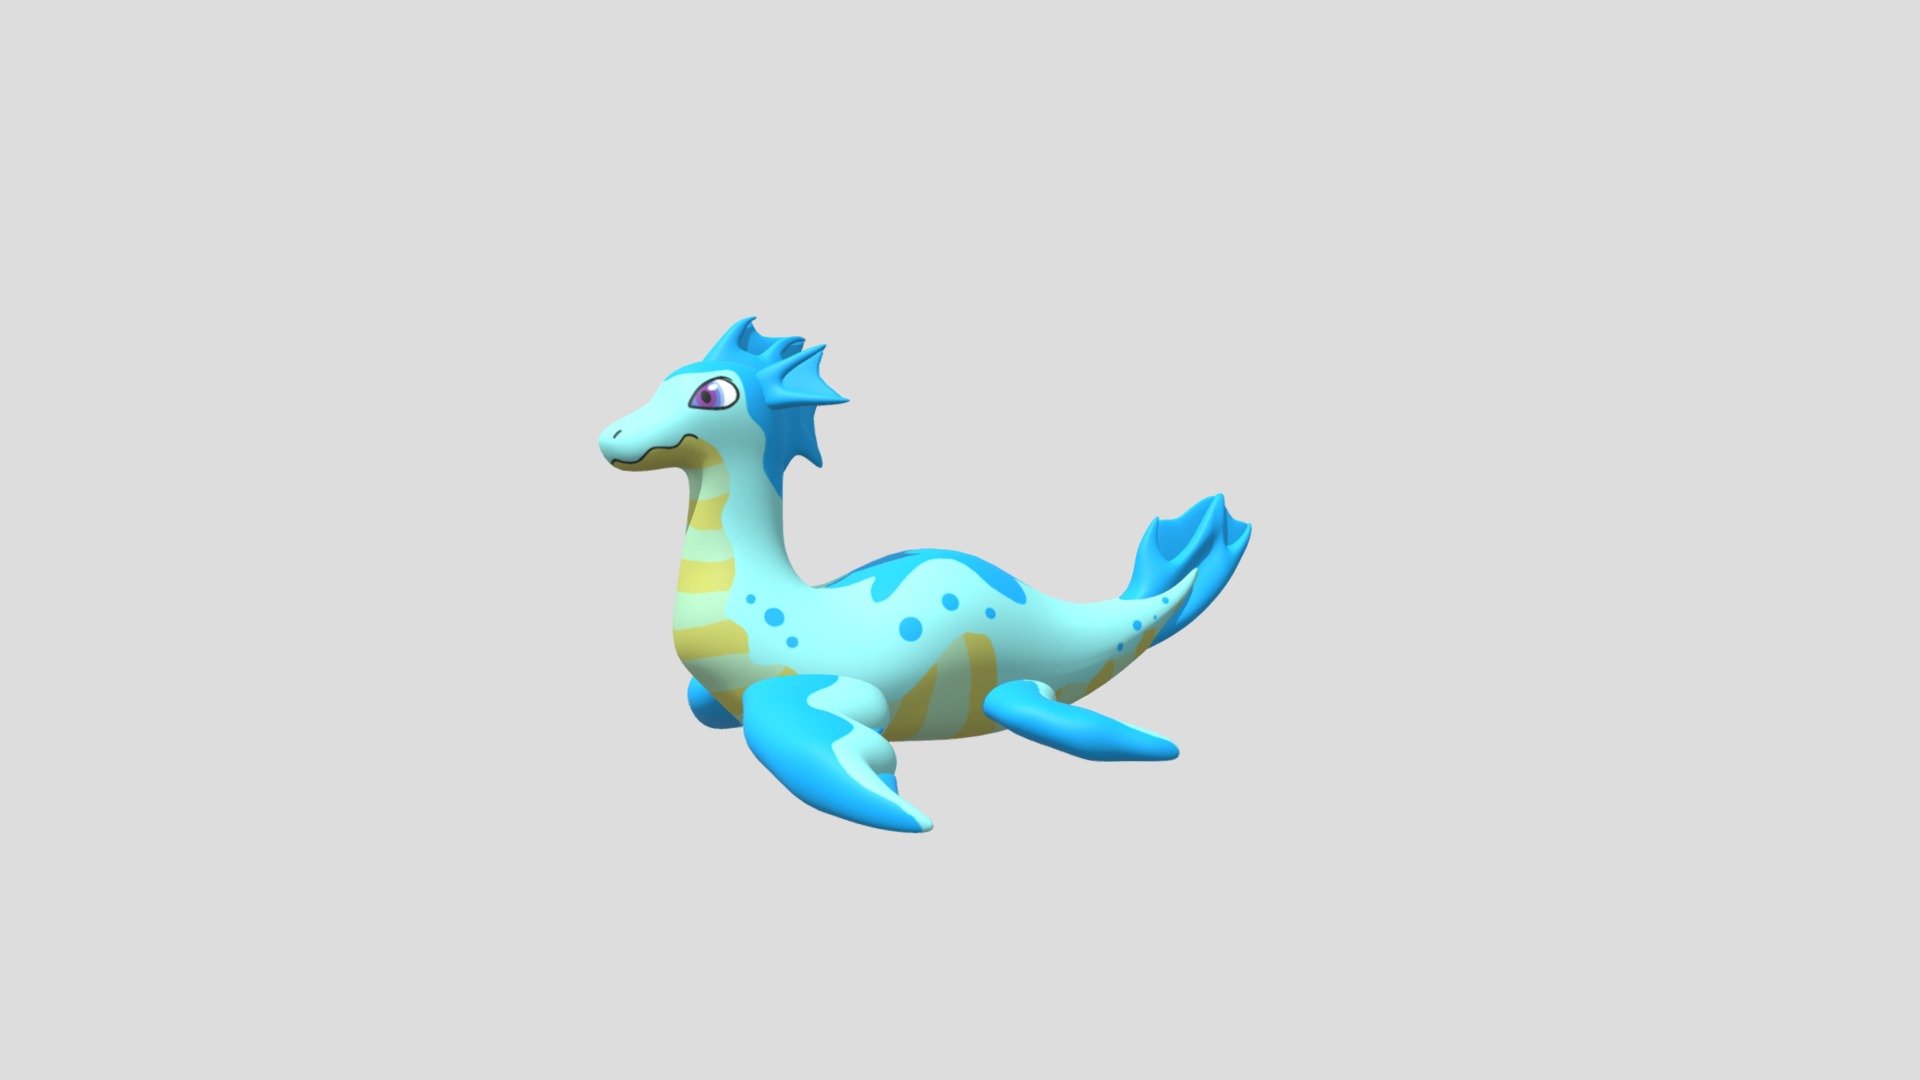 Inflatable pool toy make by PuffyPaws - PuffyPaws Sea Dragon - 3D model by fullforceural 3d model